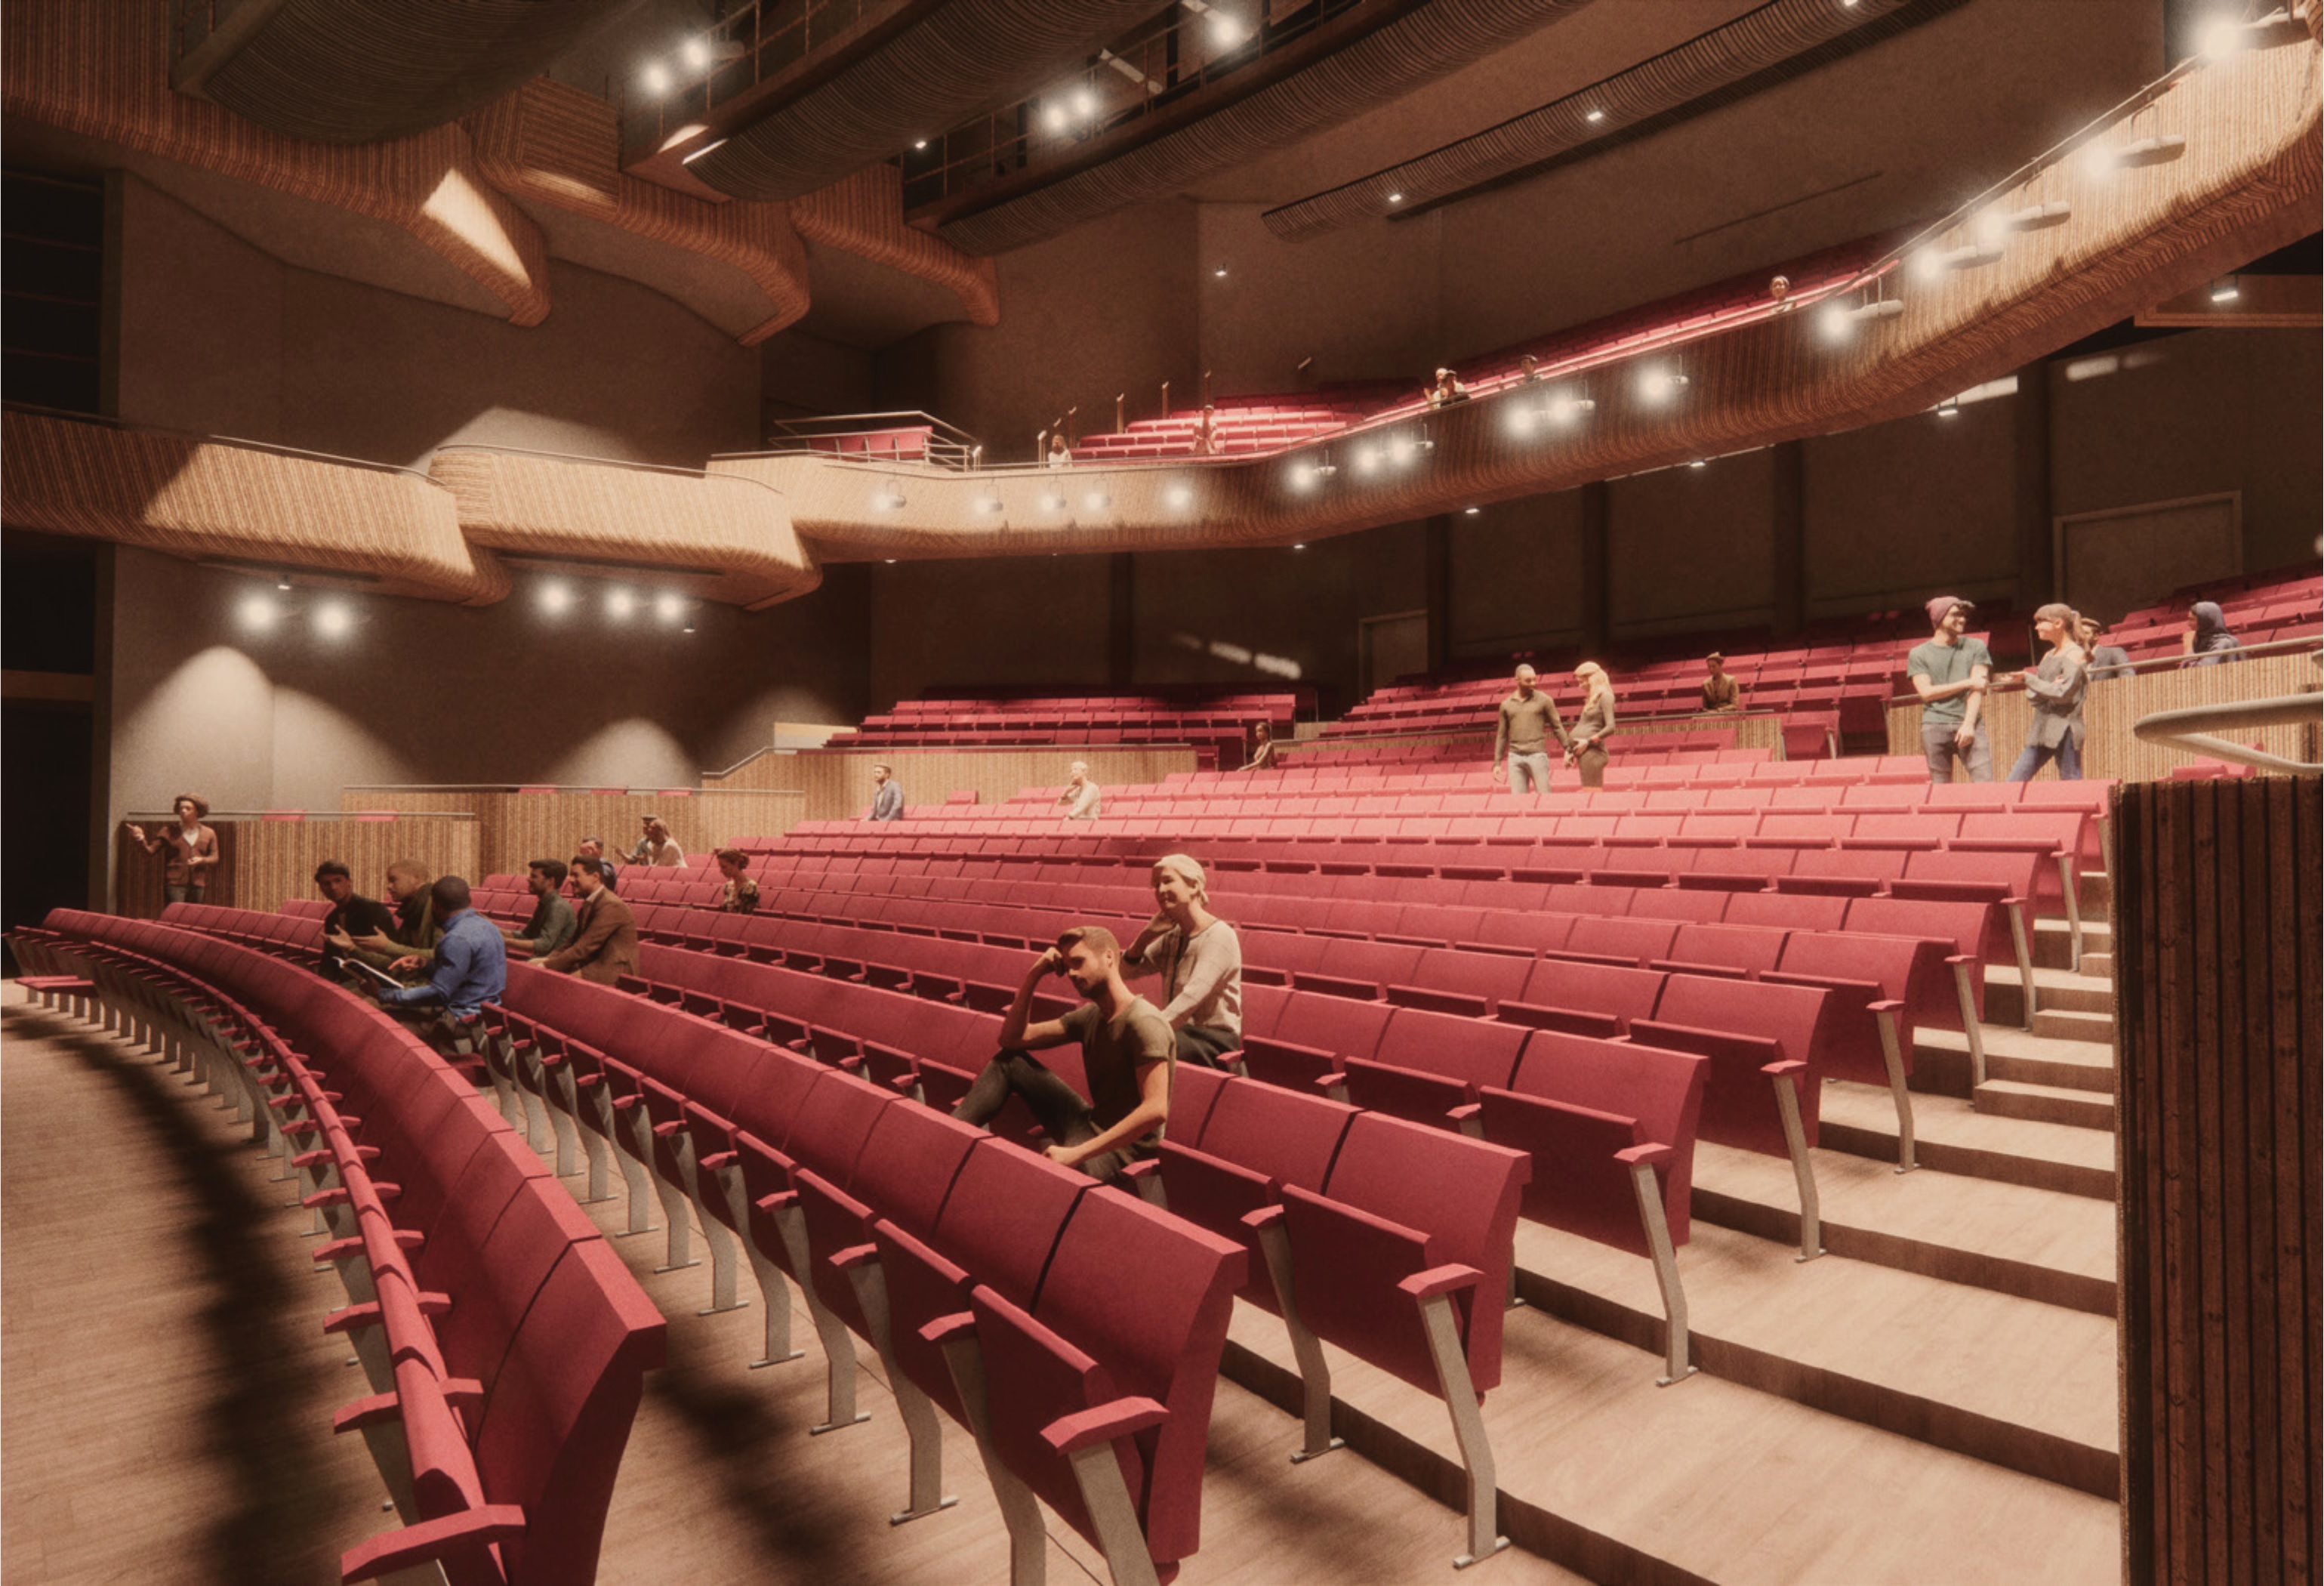 An artists impression of the auditorium